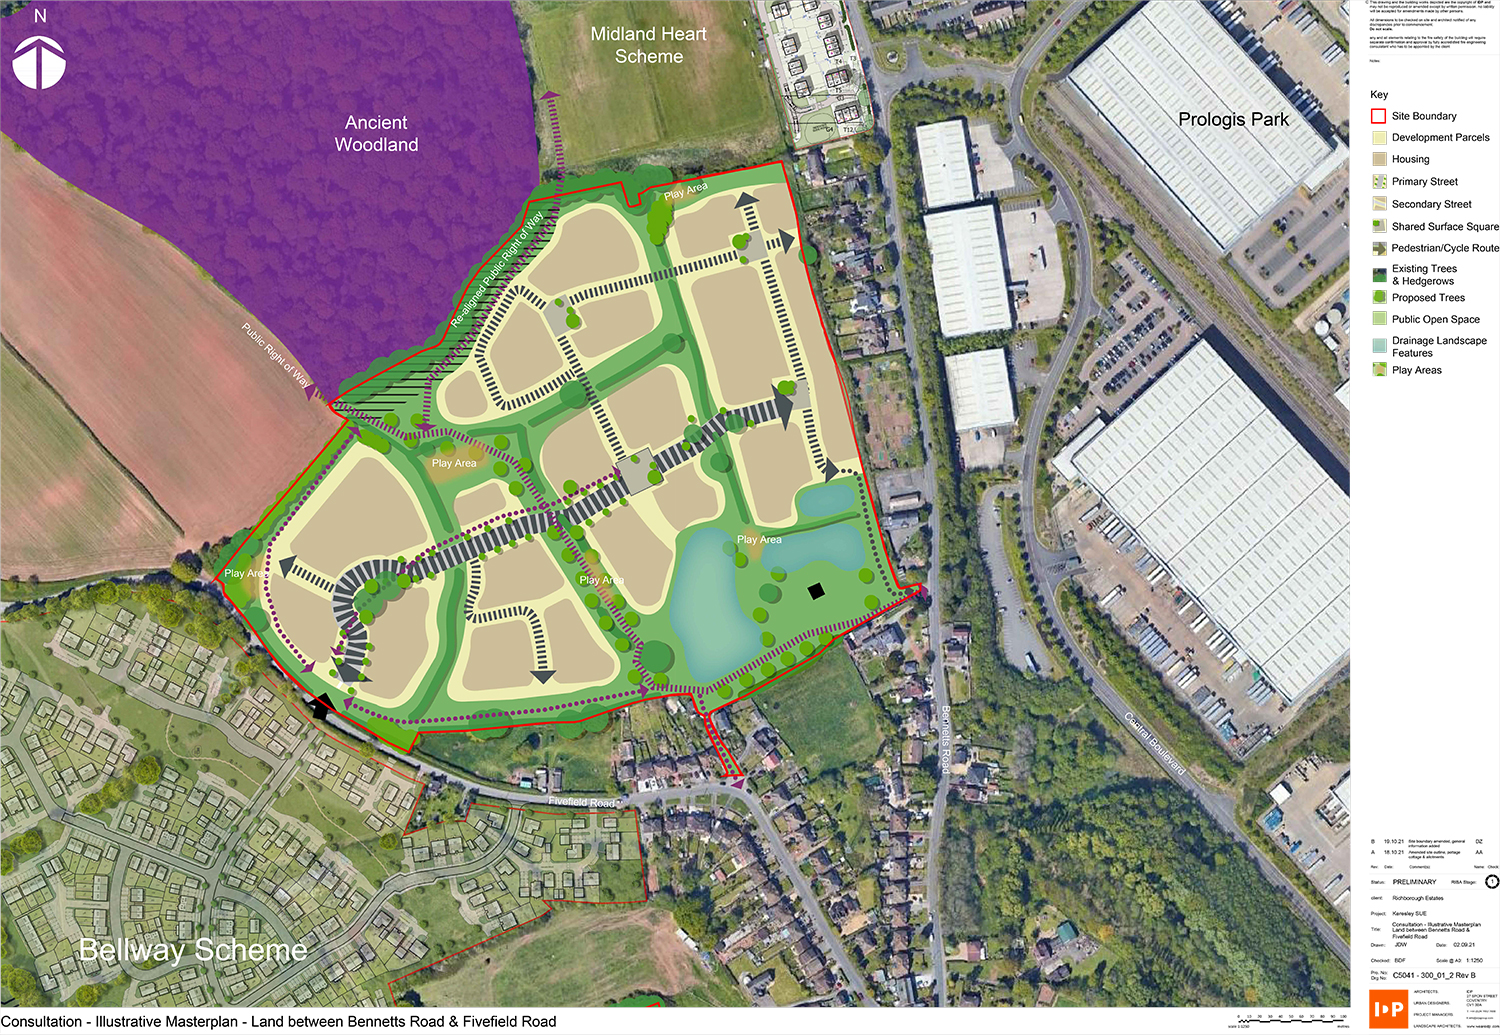 Illustrative masterplan for development on Bennetts Road and Fivefield Road